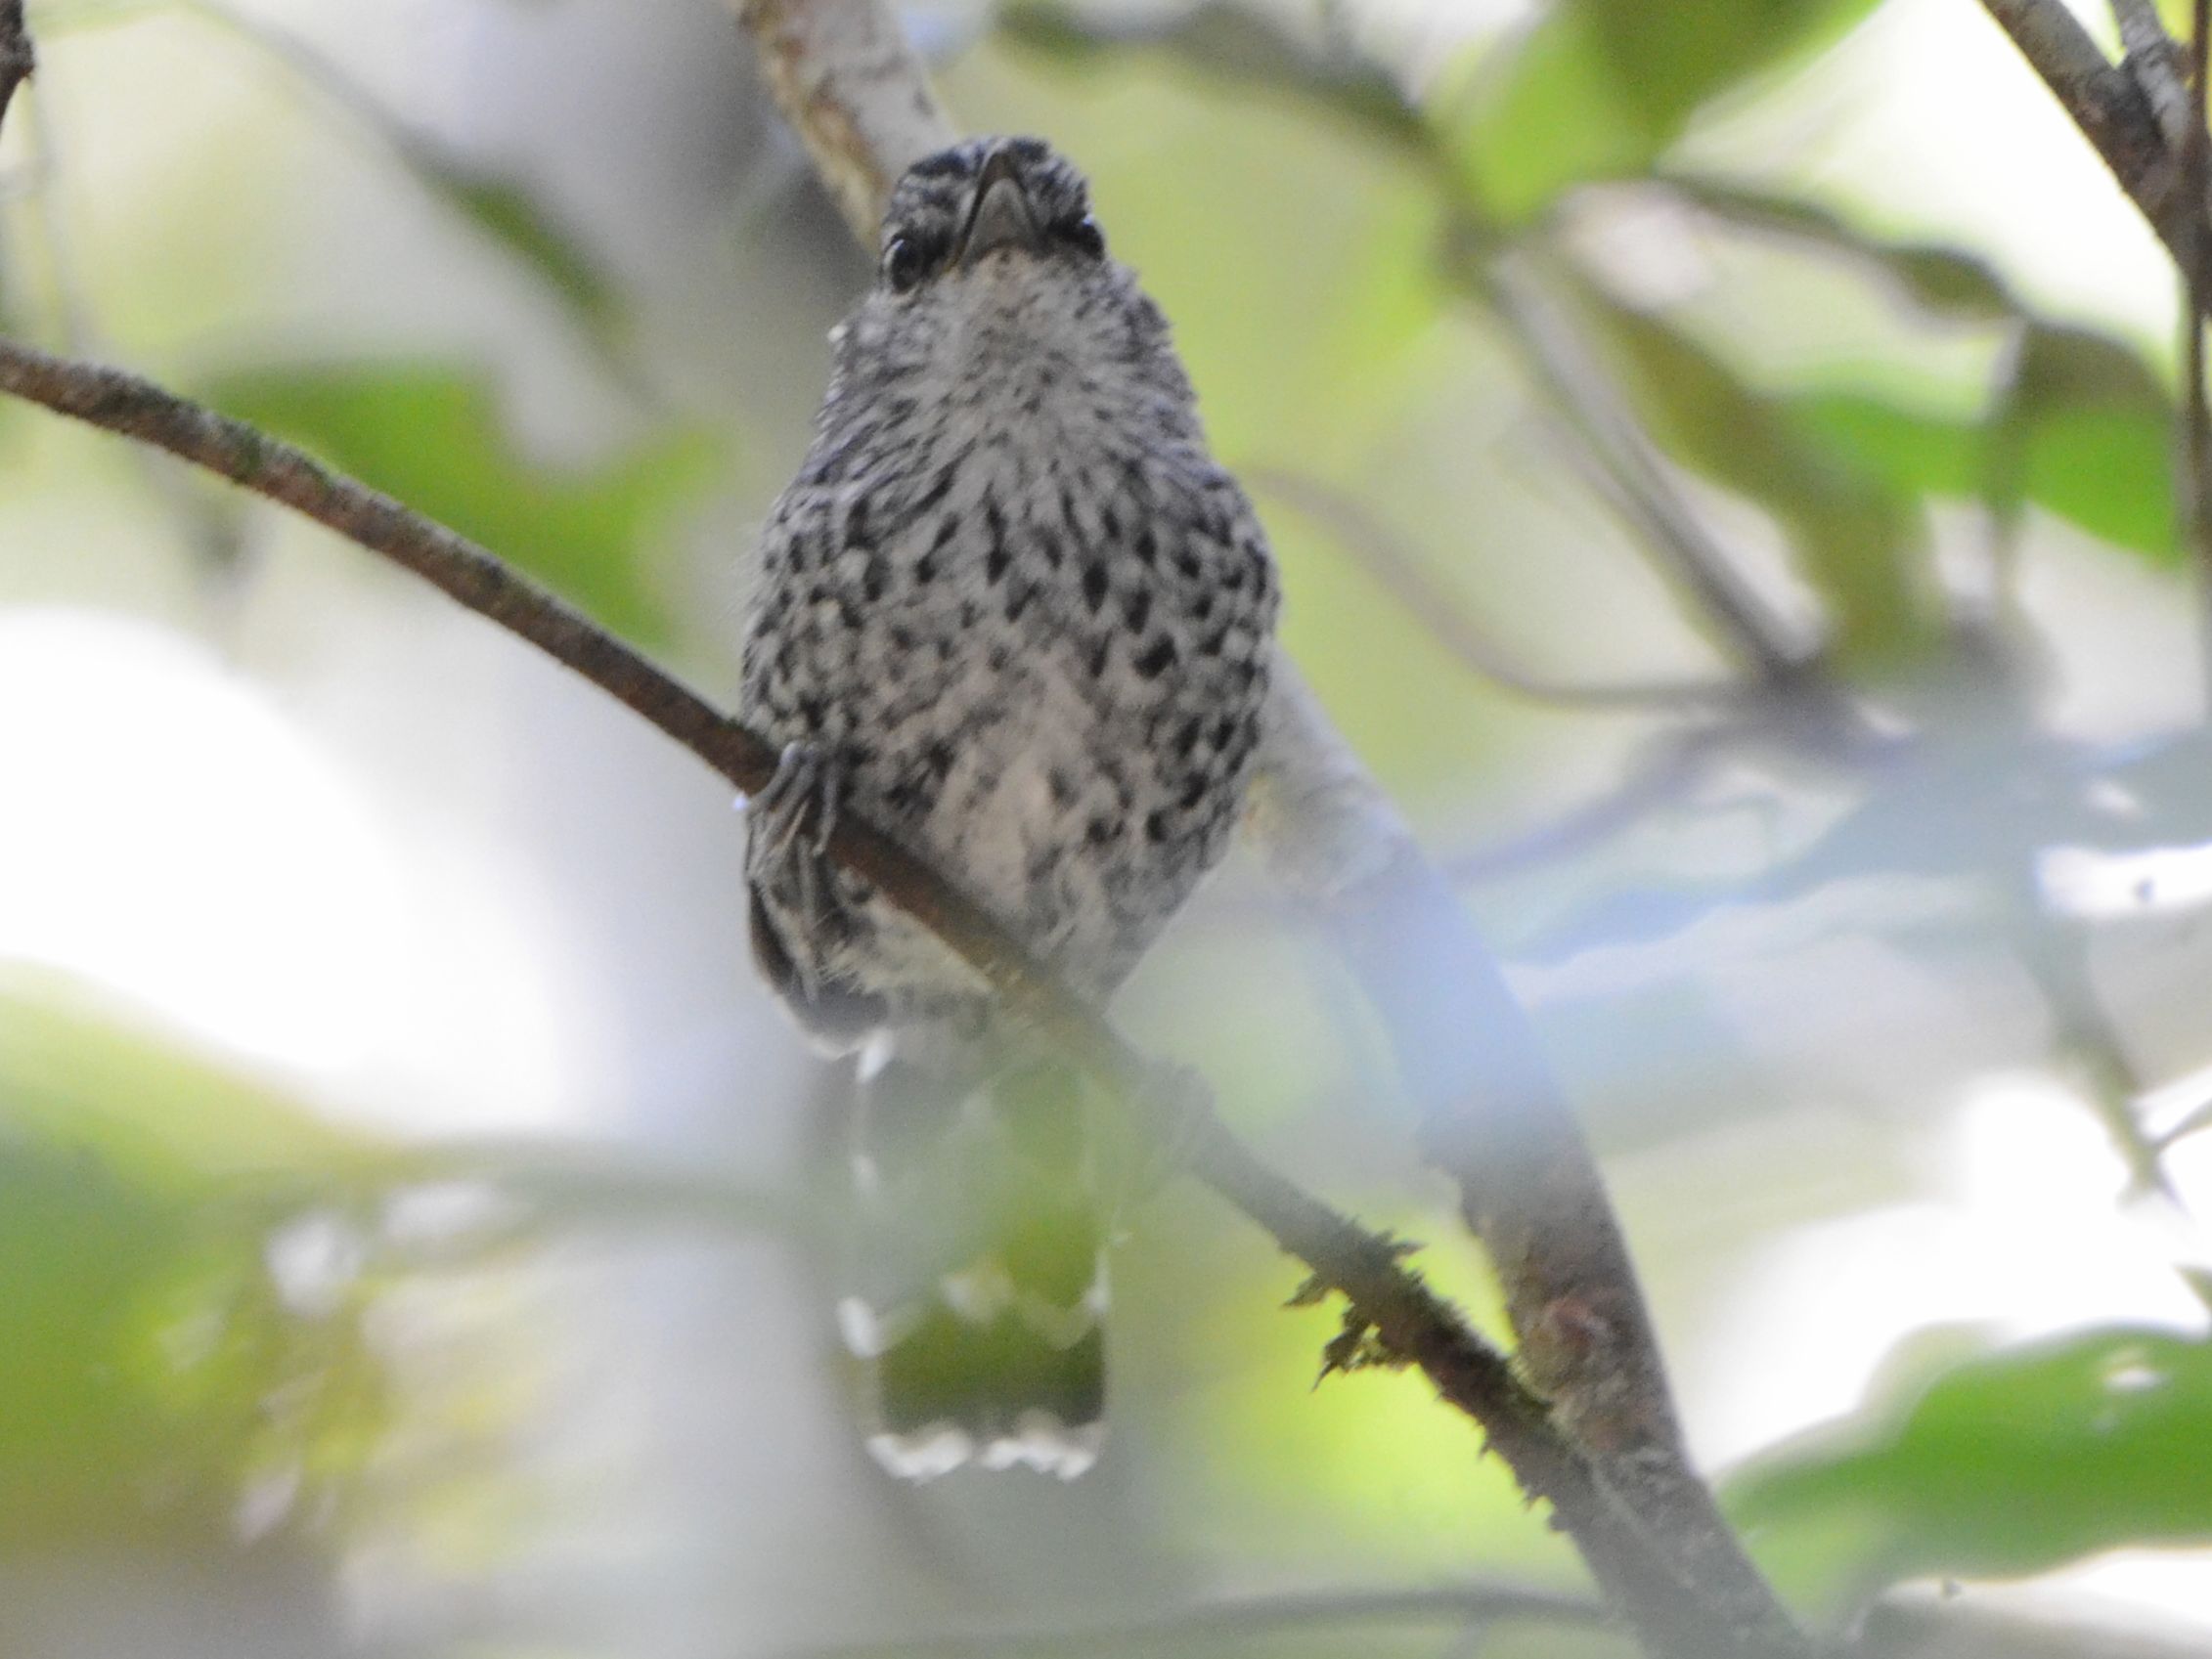 Click picture to see more Scaled Antbirds.